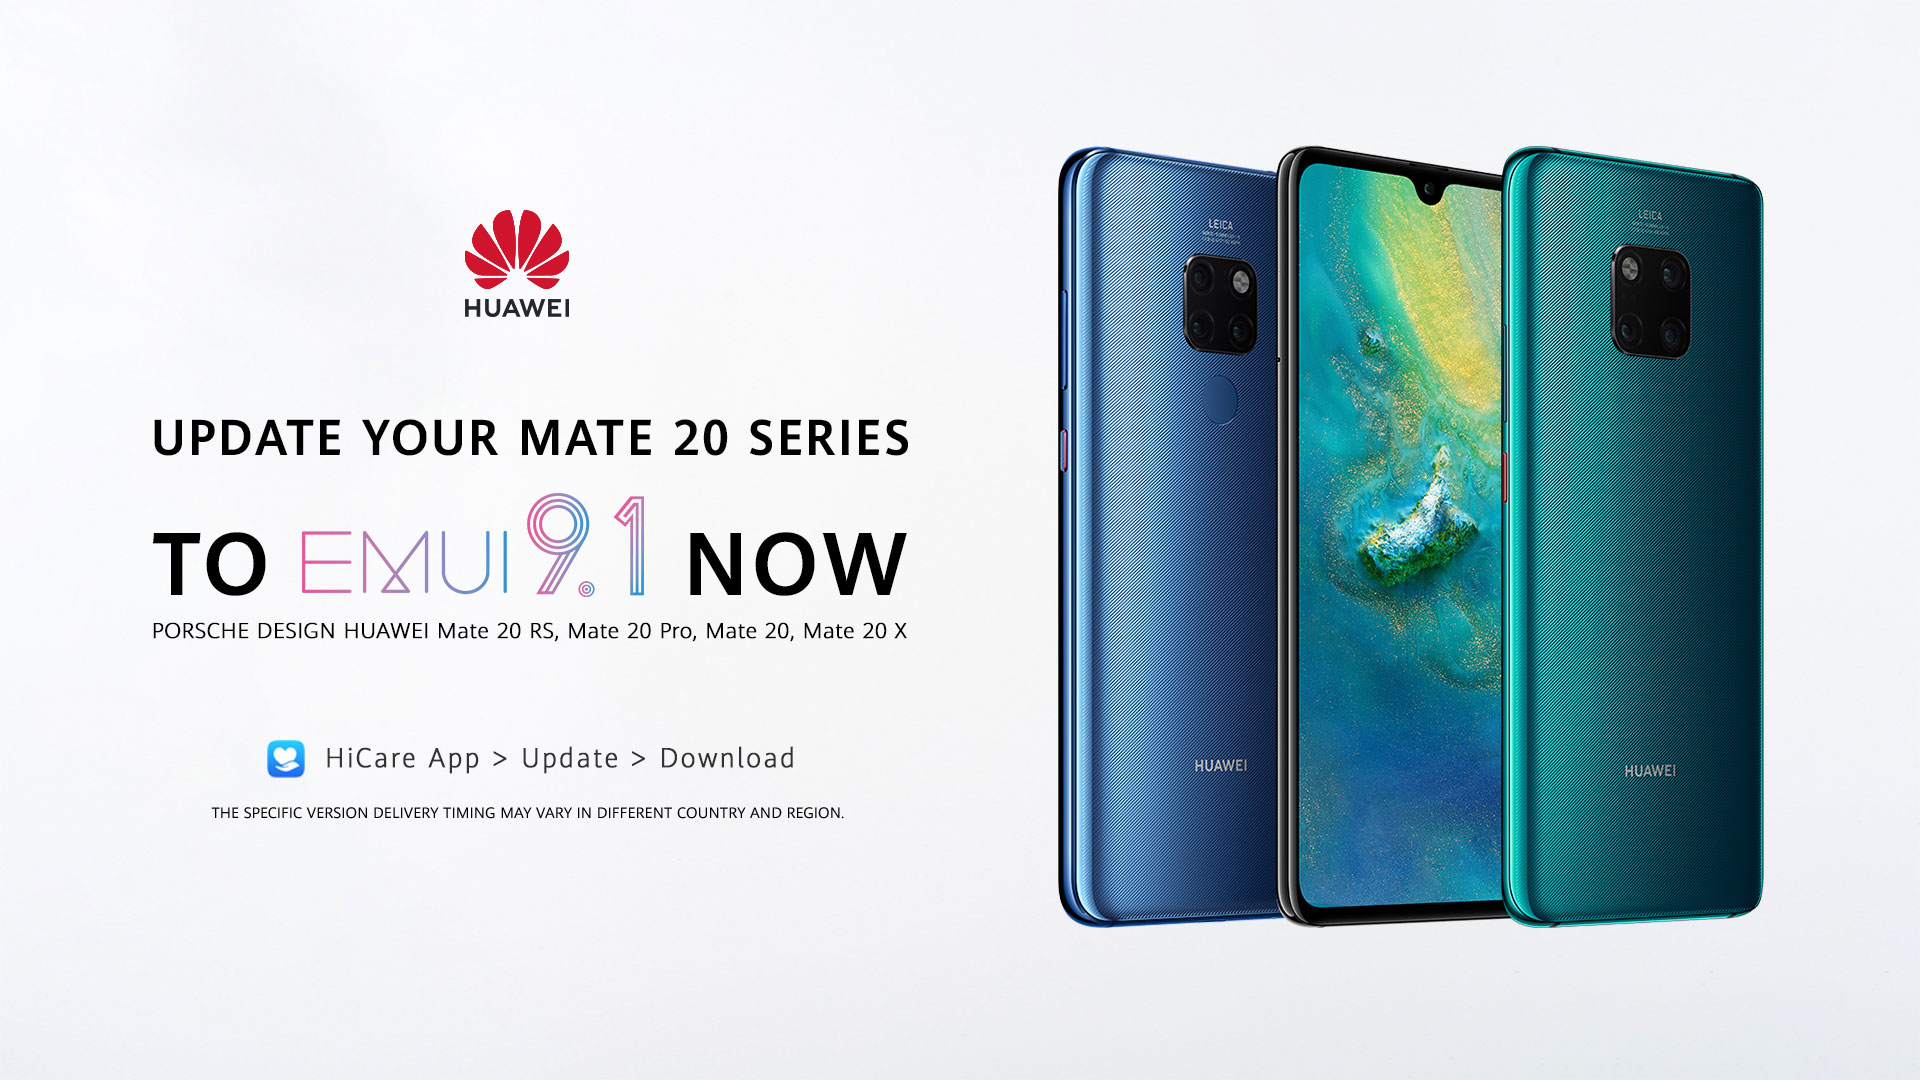 Huawei Mate 20 series get EMUI 9.1 update, more devices to follow